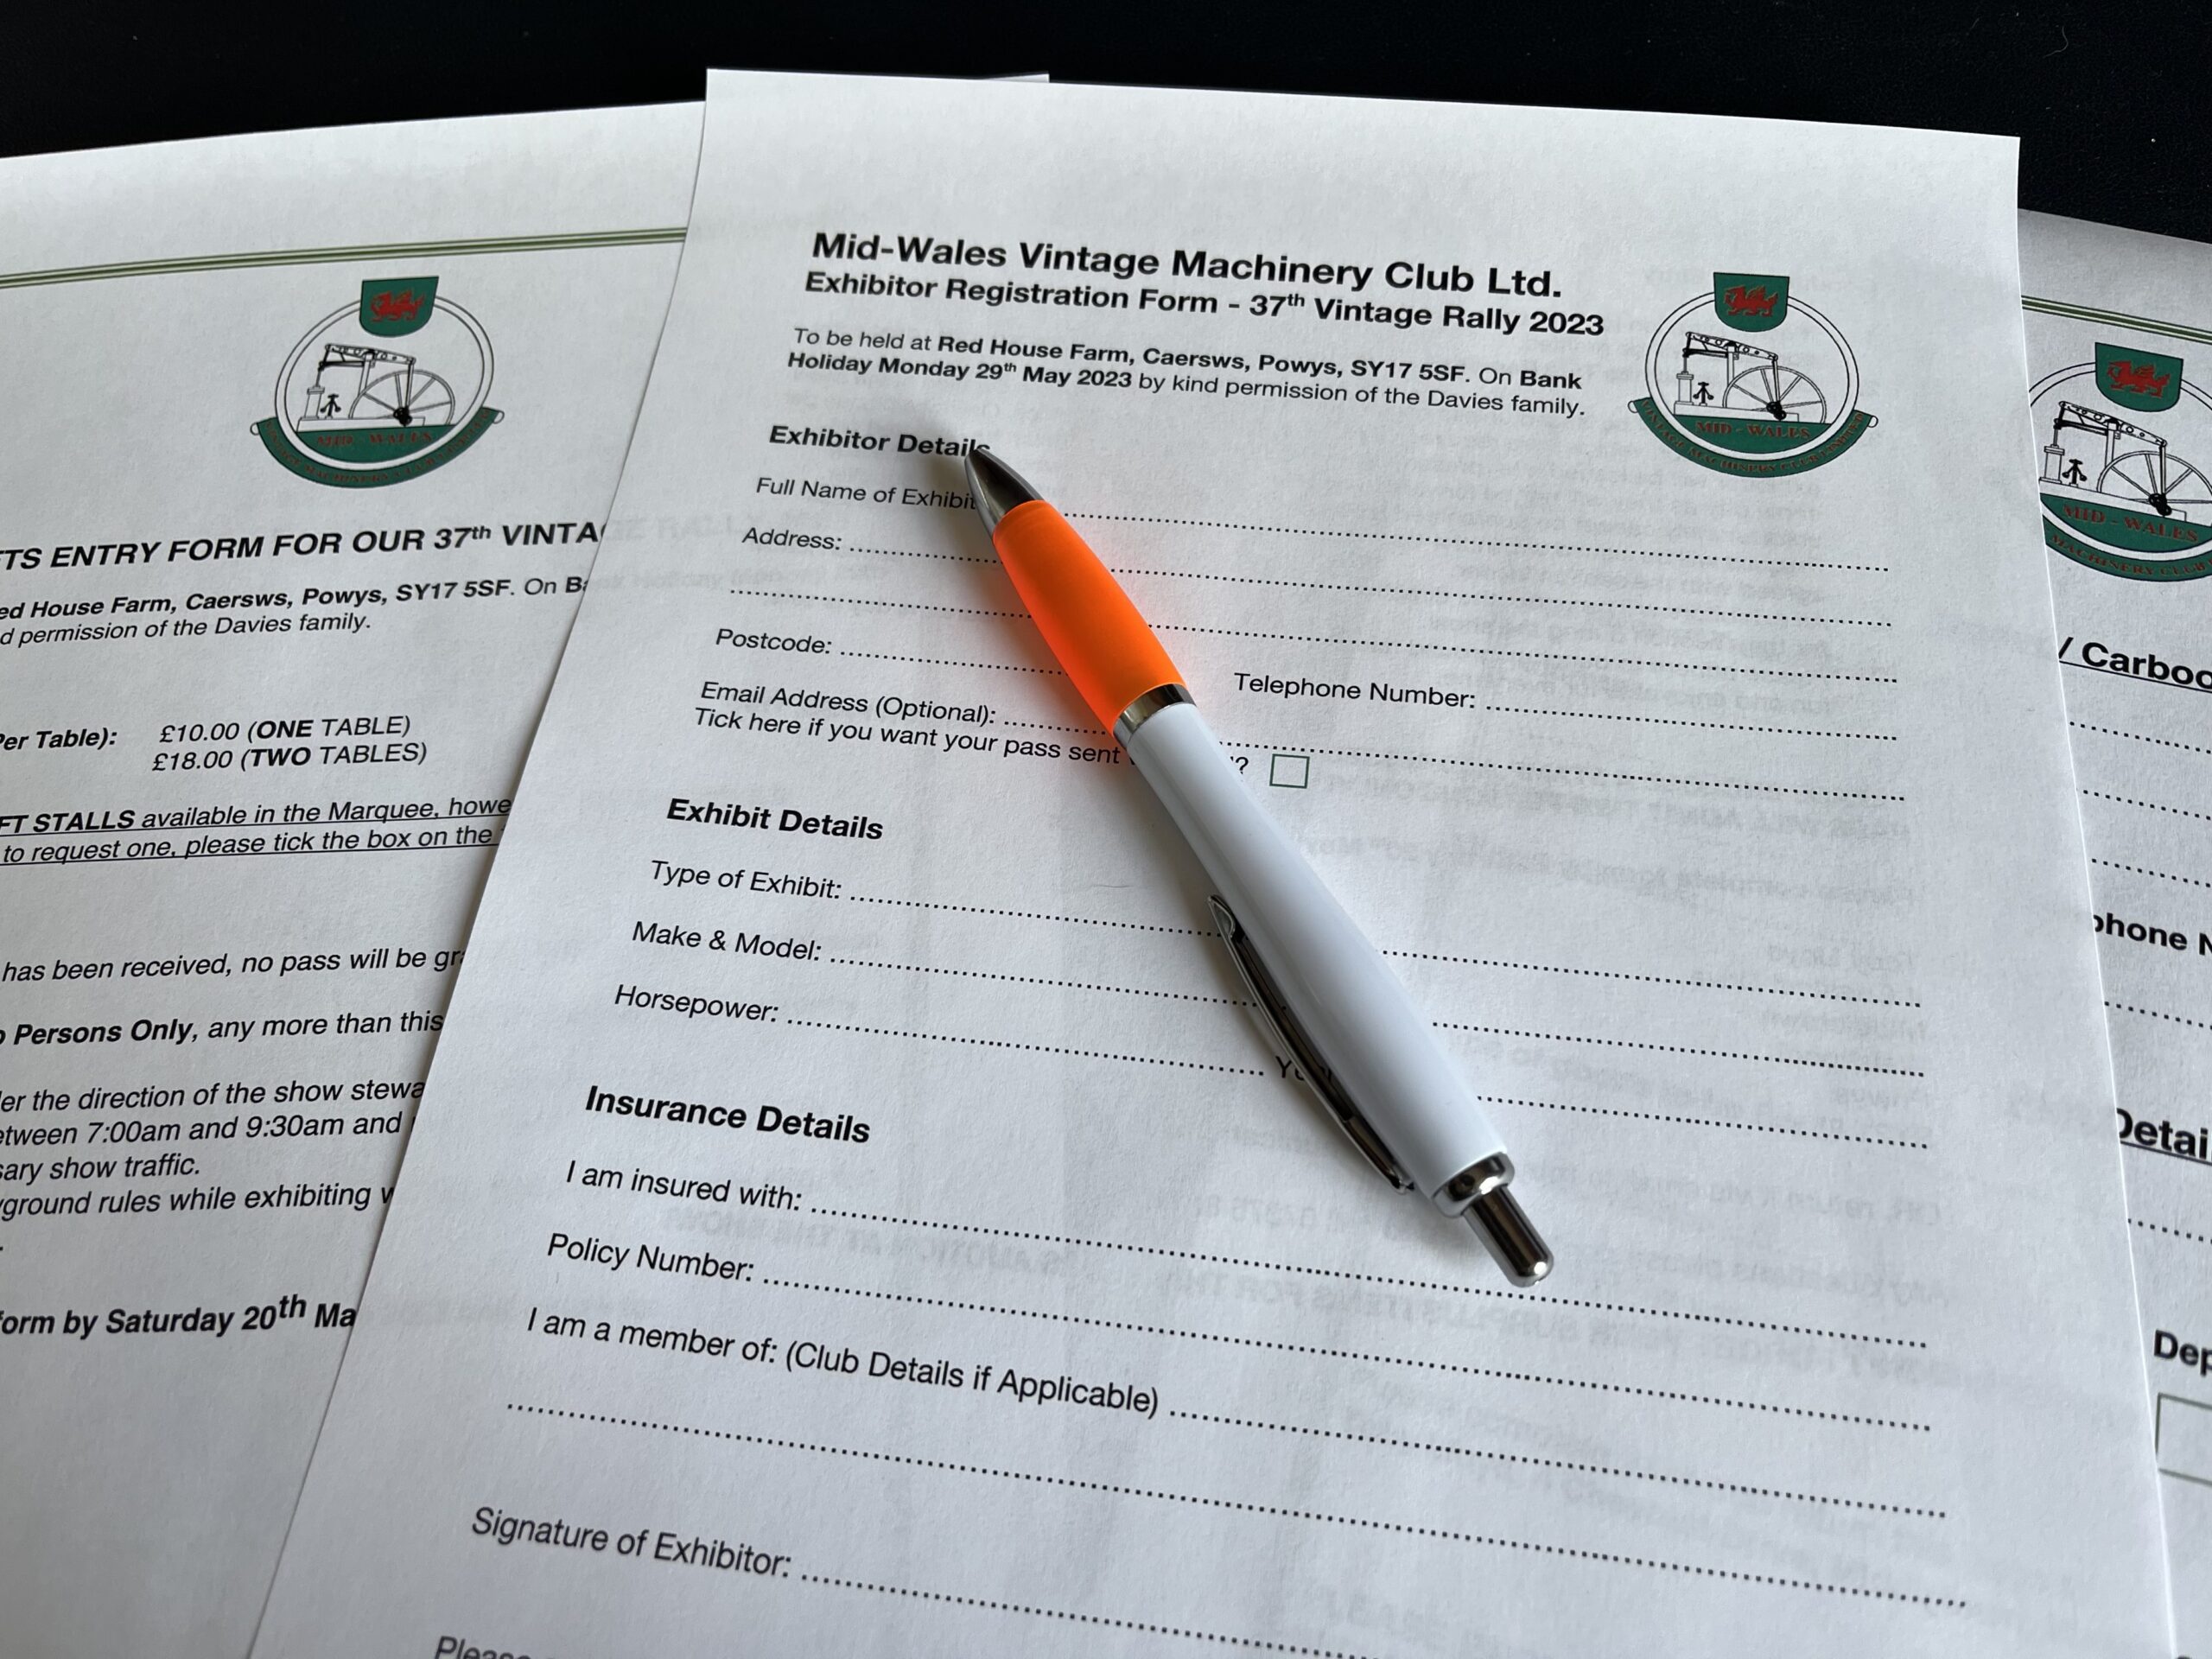 Downloadable entry forms now available to… download.